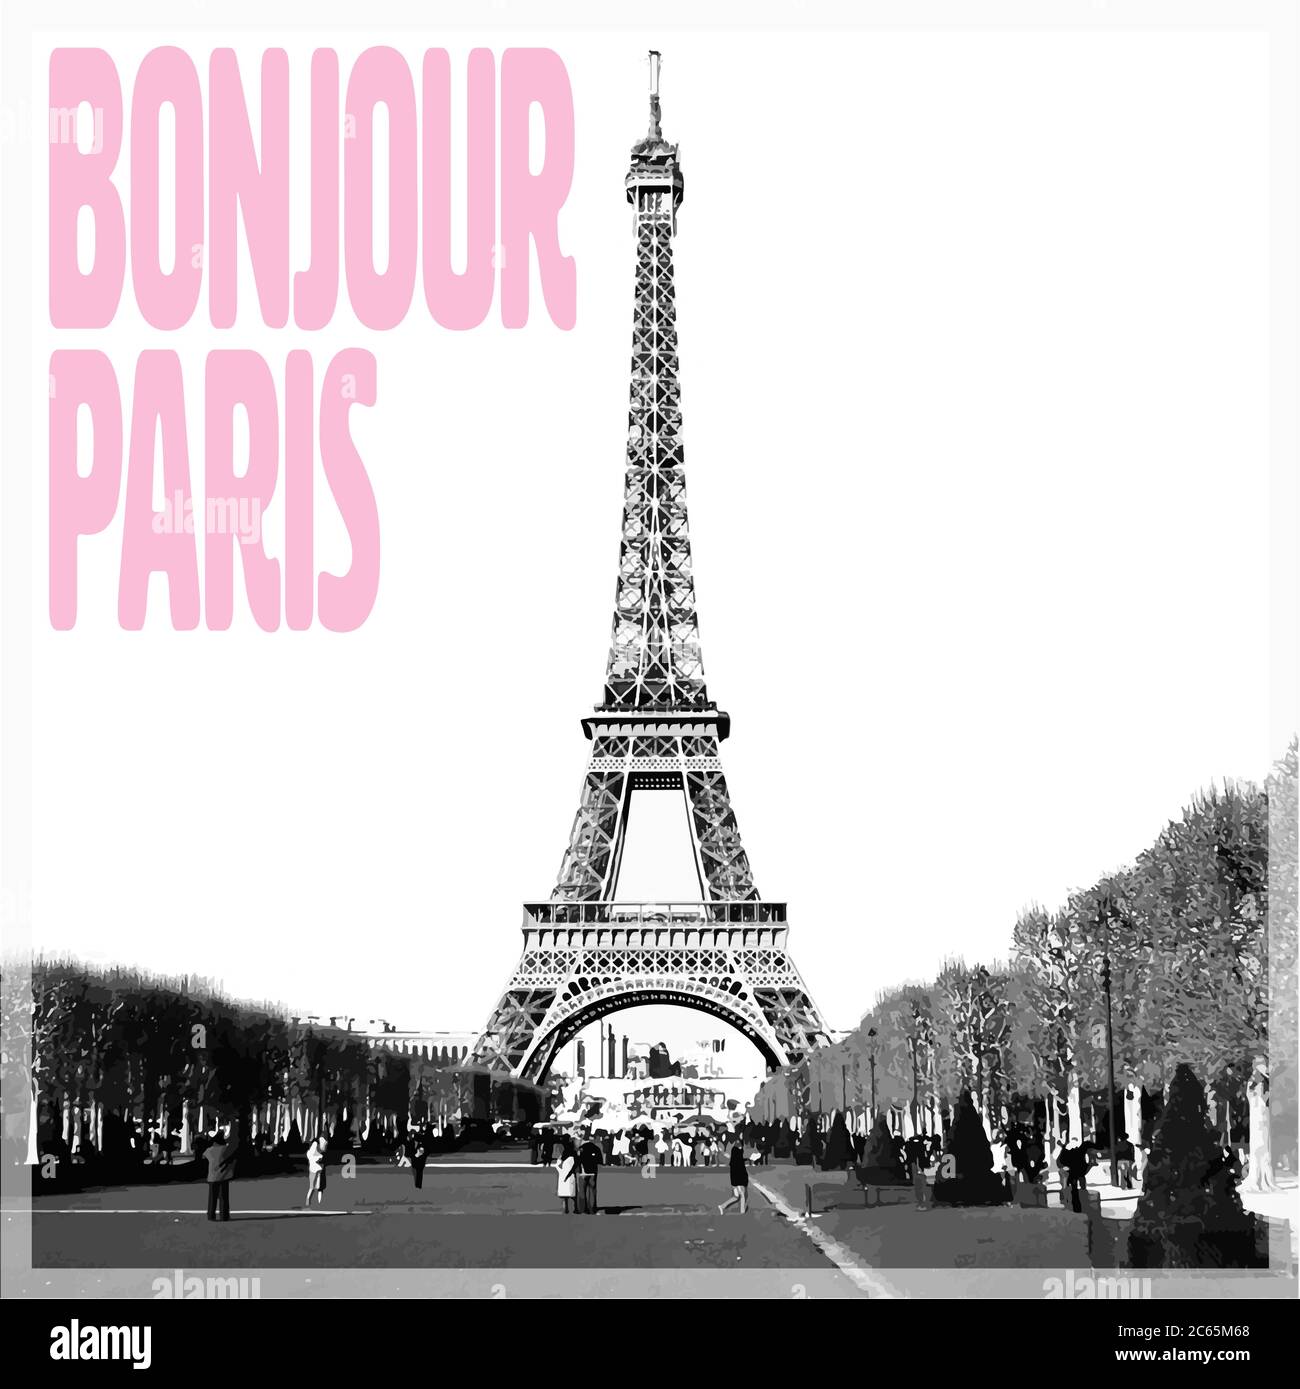 Bonjour Paris - Romantic card with pink quote and vectorized photo of Eiffel Tower in black and white, France, Europe Stock Vector